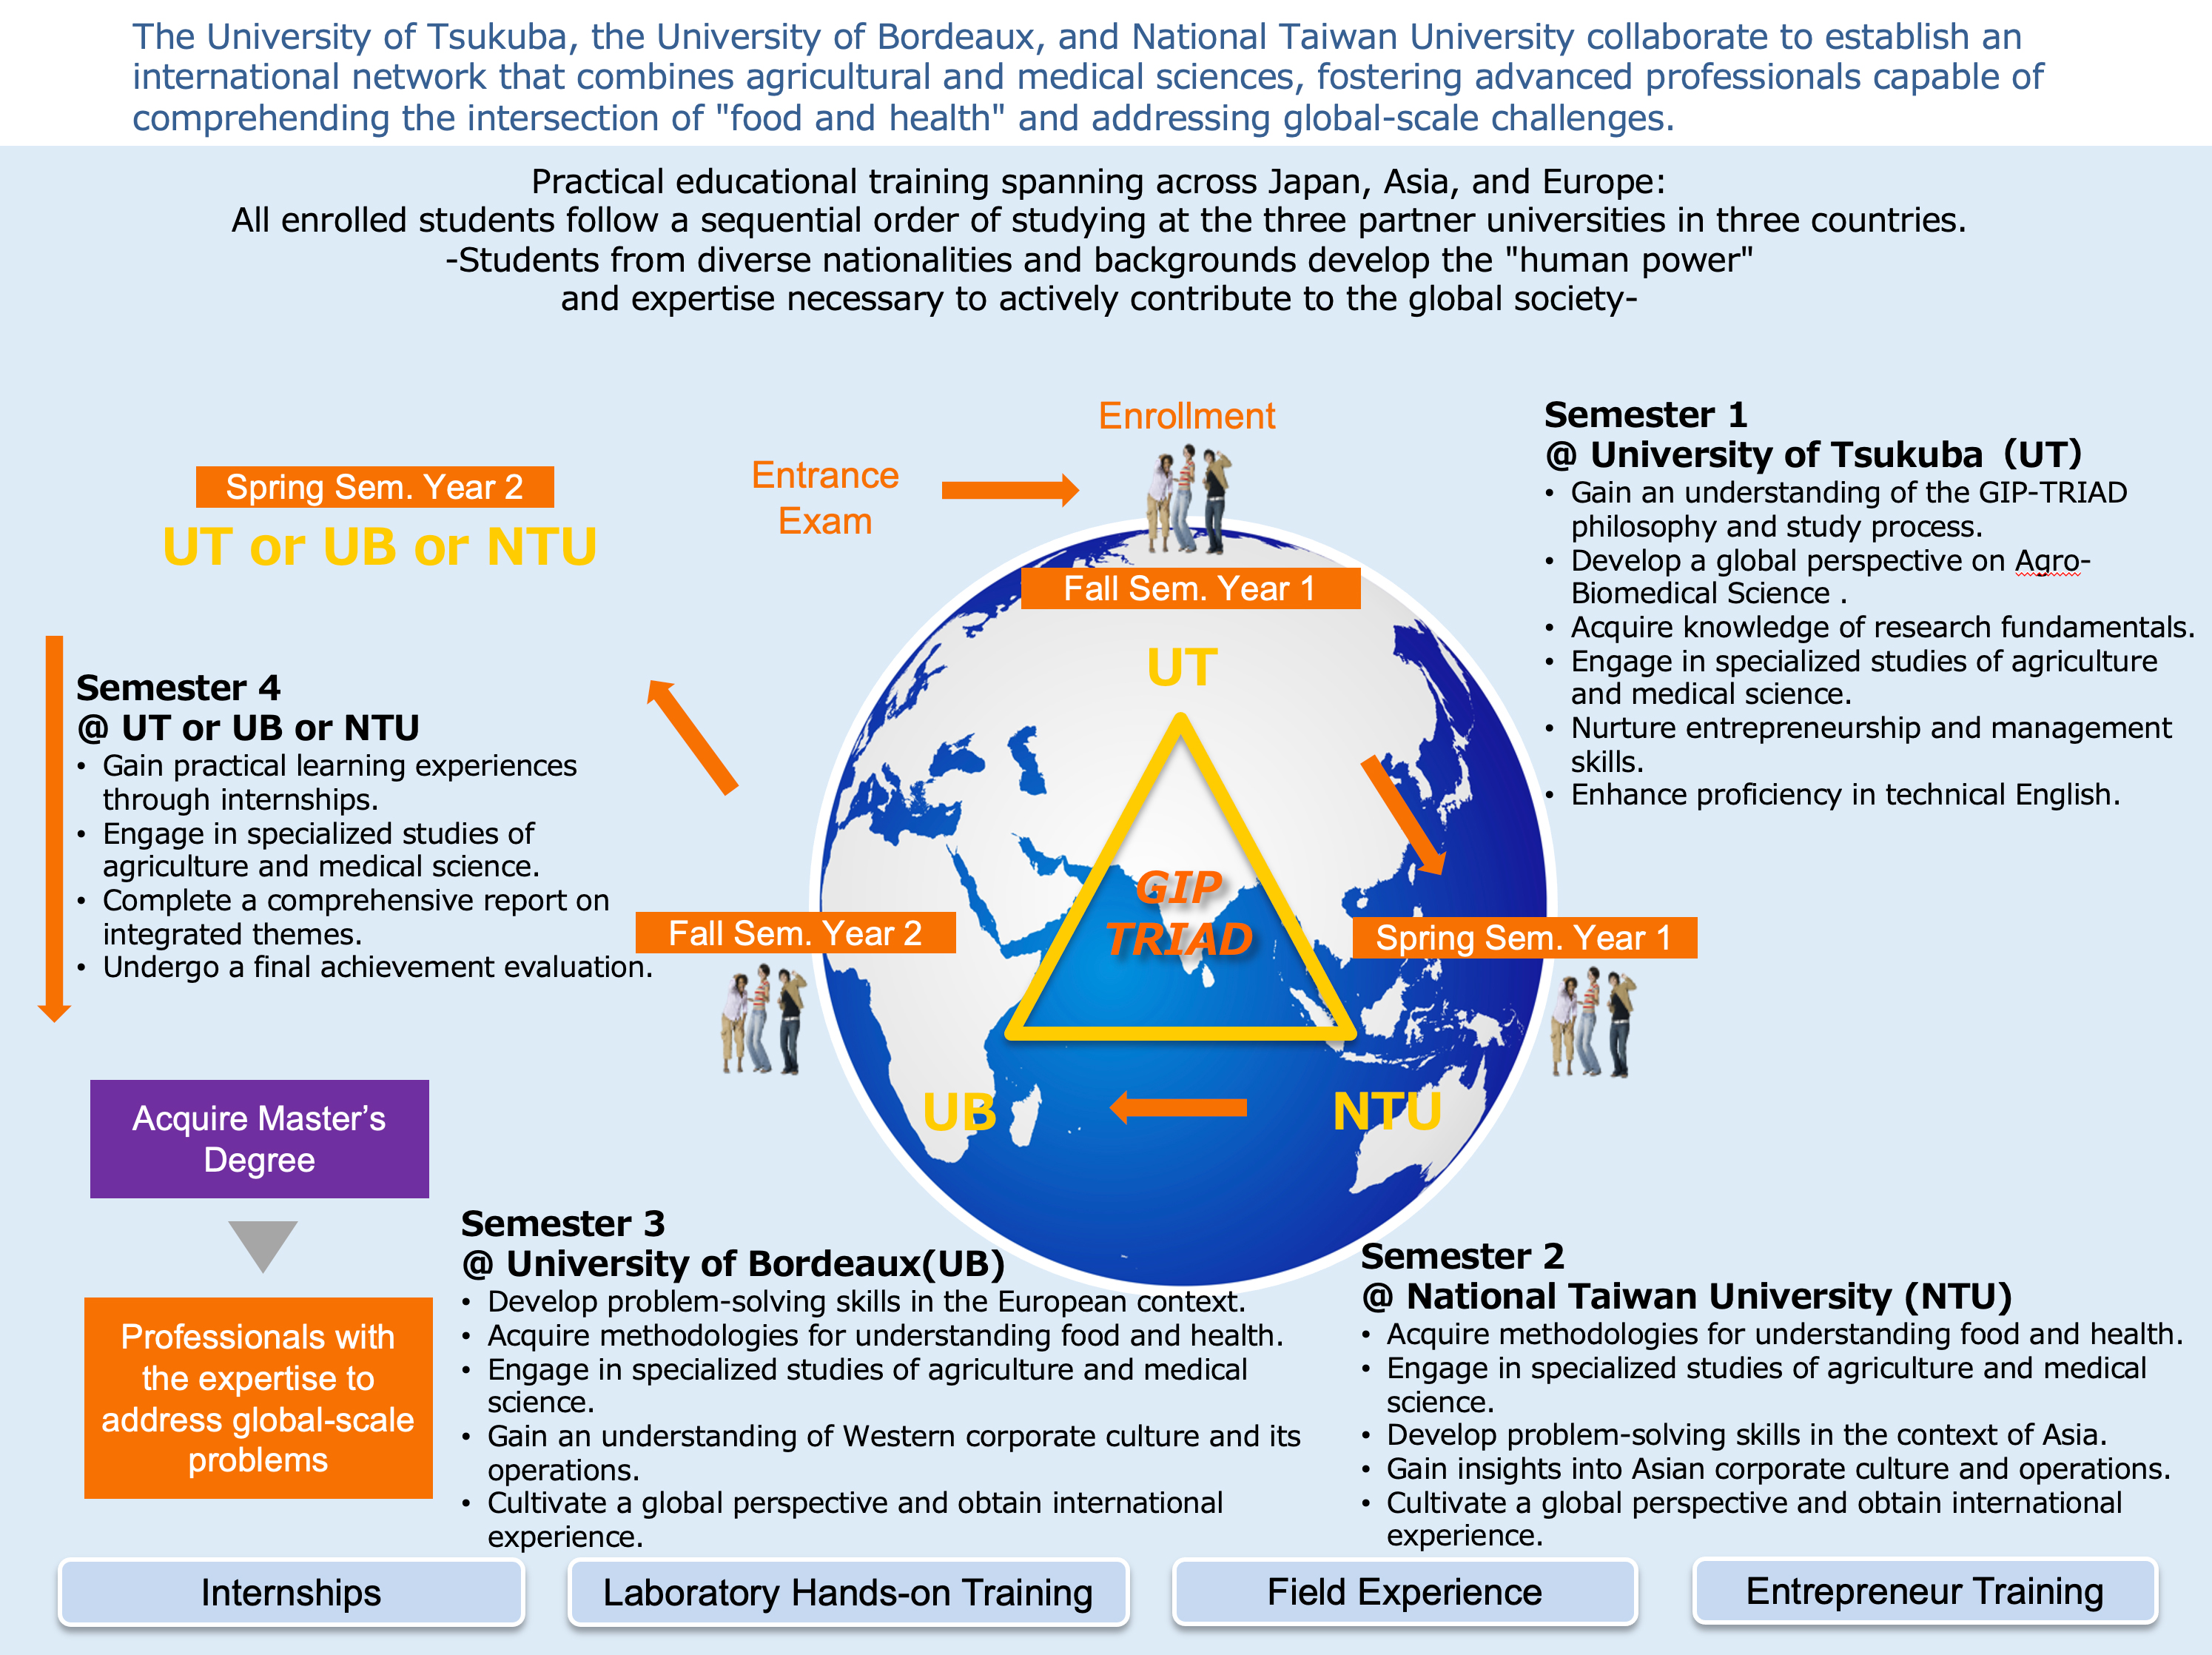 Overview of GIP-TRIAD